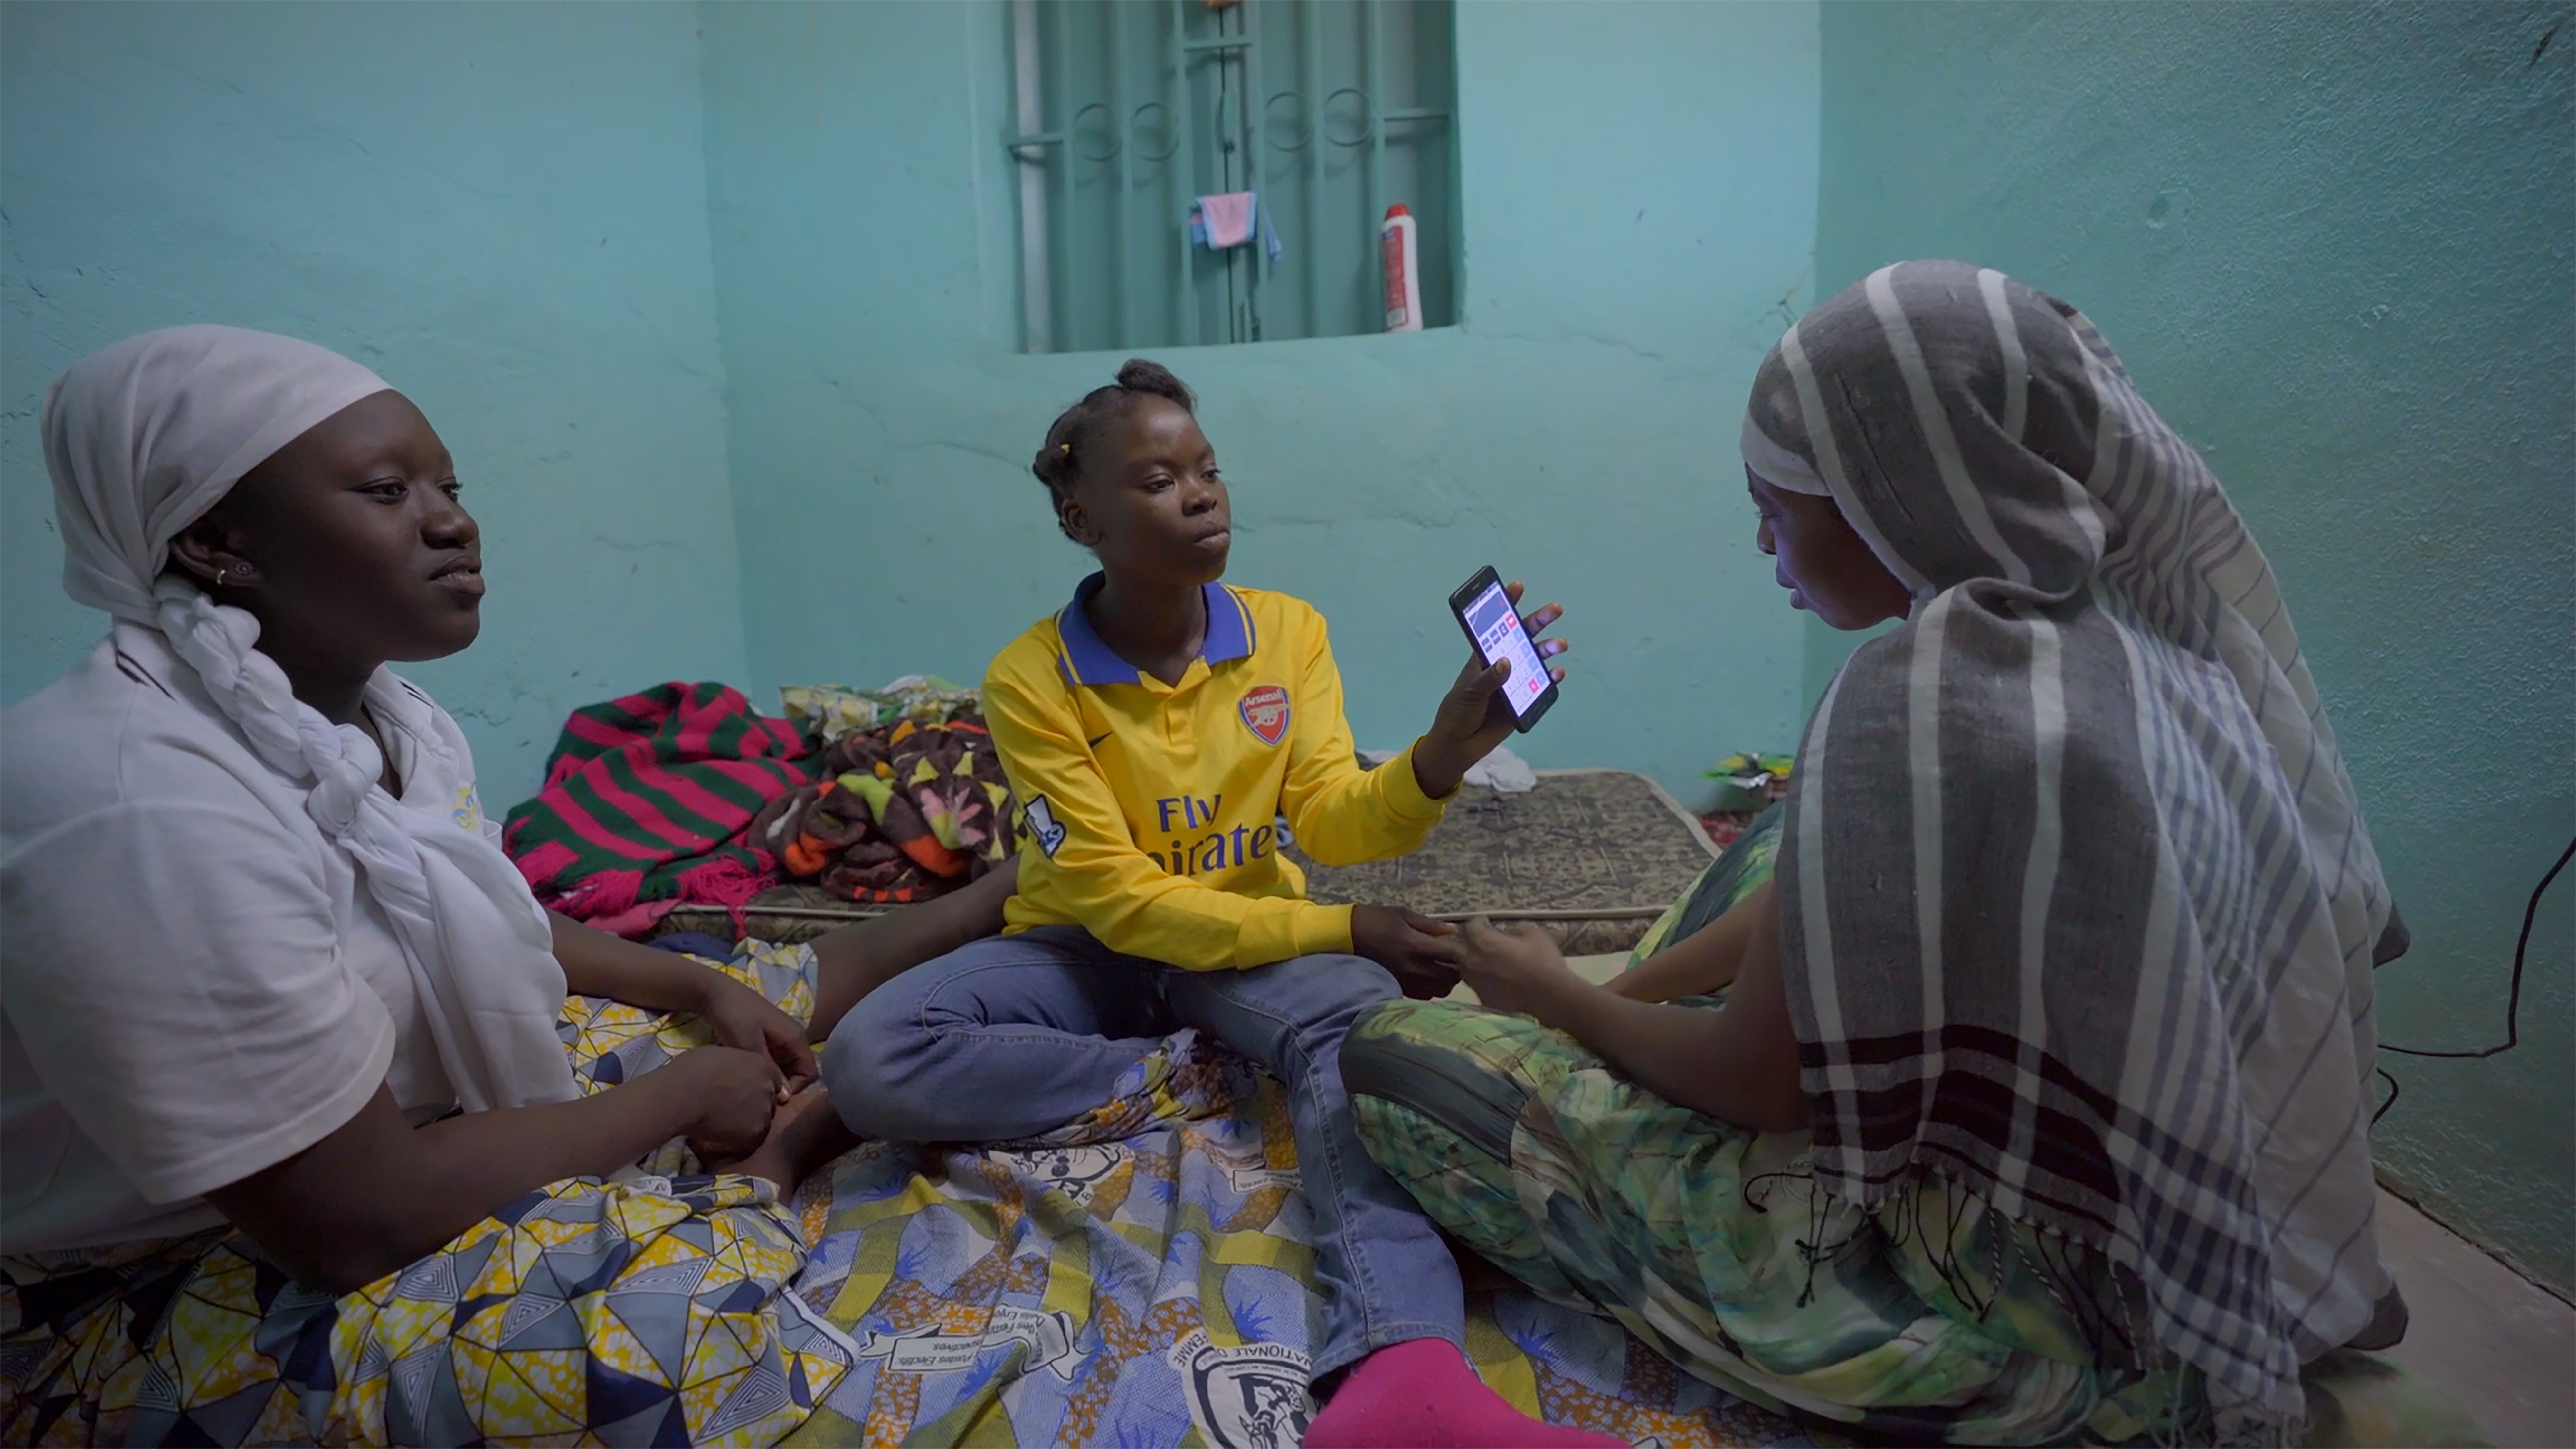 Three African girls sit in a room against a turquoise background as one shows her phone. From Ousmane Samassékou’s 'The Last Shelter.' Photo courtesy of STEPS. 